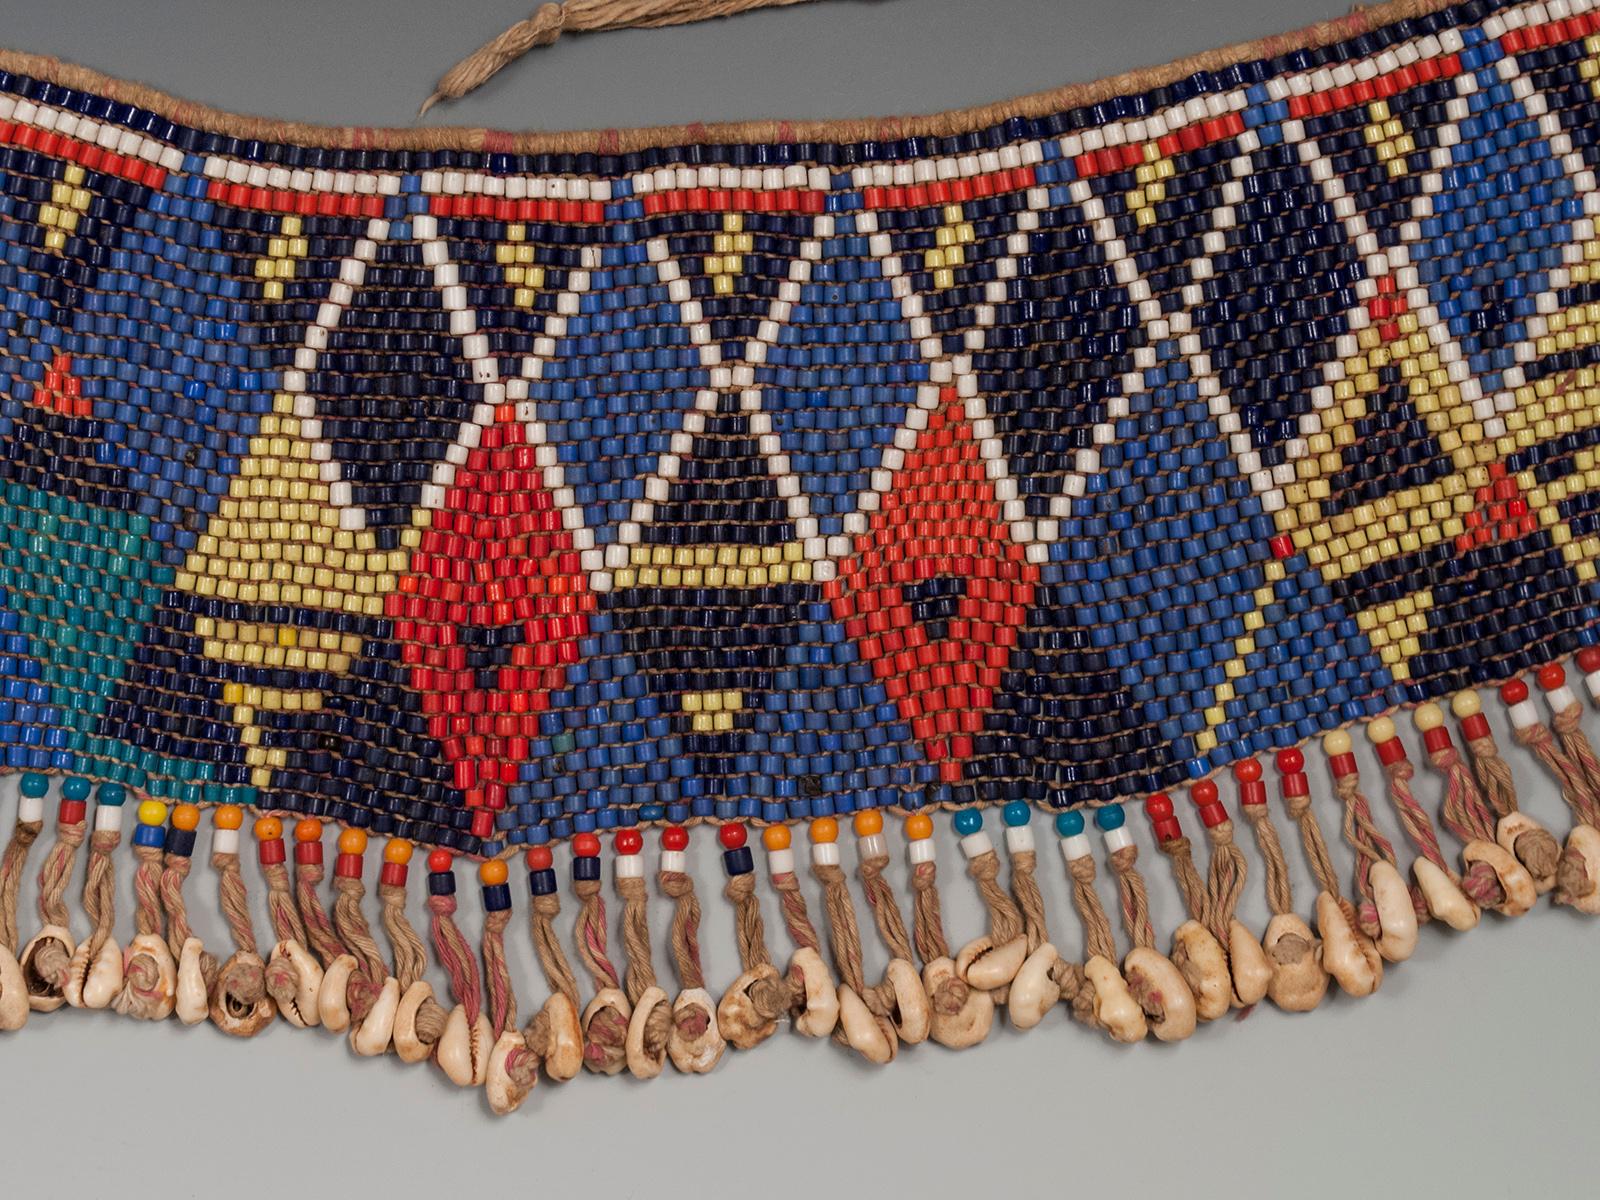 Mid-20th century tribal beaded cache-sexe modesty apron (pikuran), Mandara Mountains, Cameroon

These colorful cache-sexe were worn for celebrations, rituals and rites of passage by women who had reached puberty. A very colorful, jazzy example